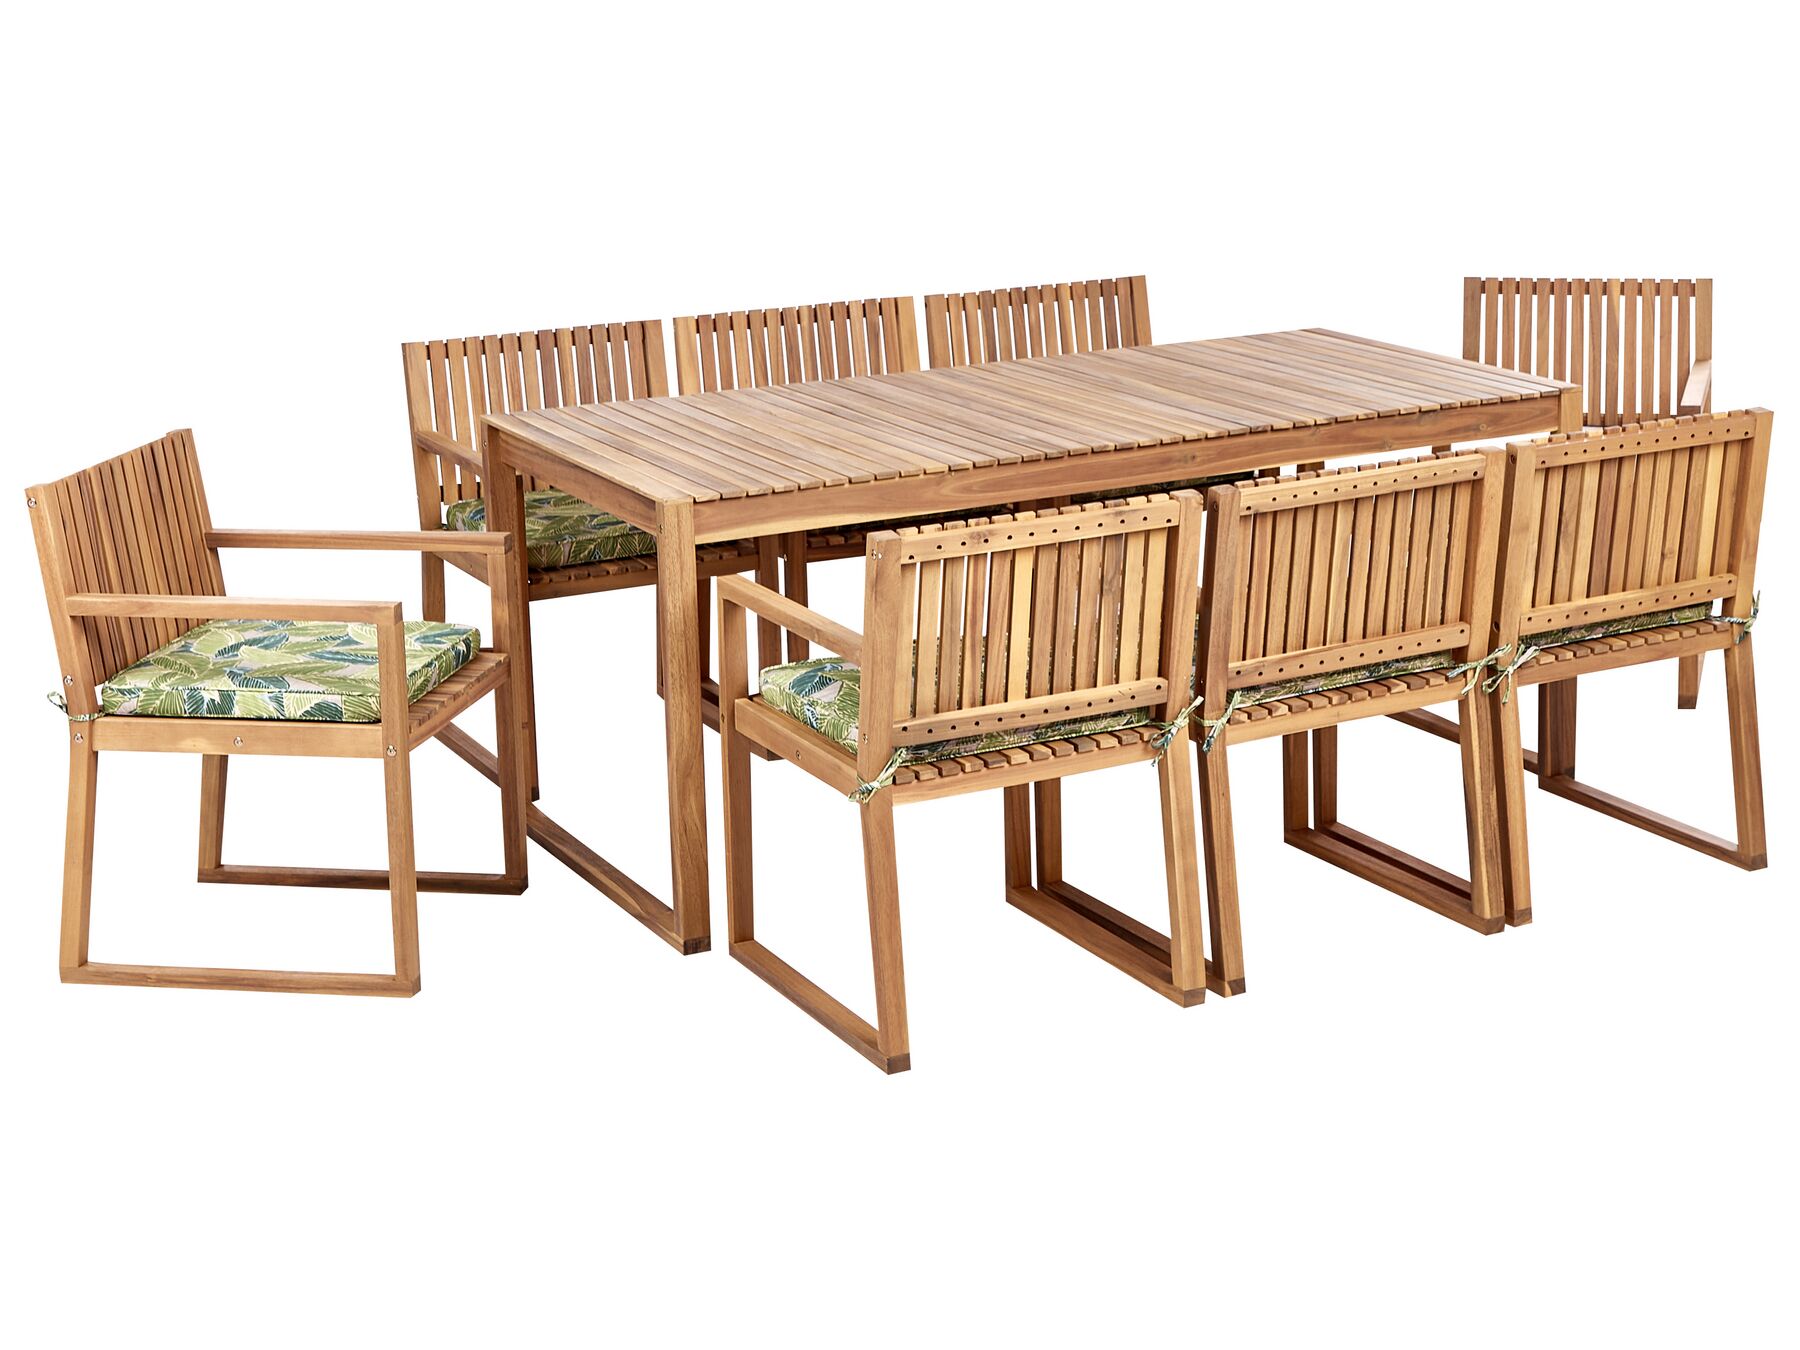 8 Seater Certified Acacia Wood Garden Dining Set with Leaf Pattern Green Cushions SASSARI II_924049